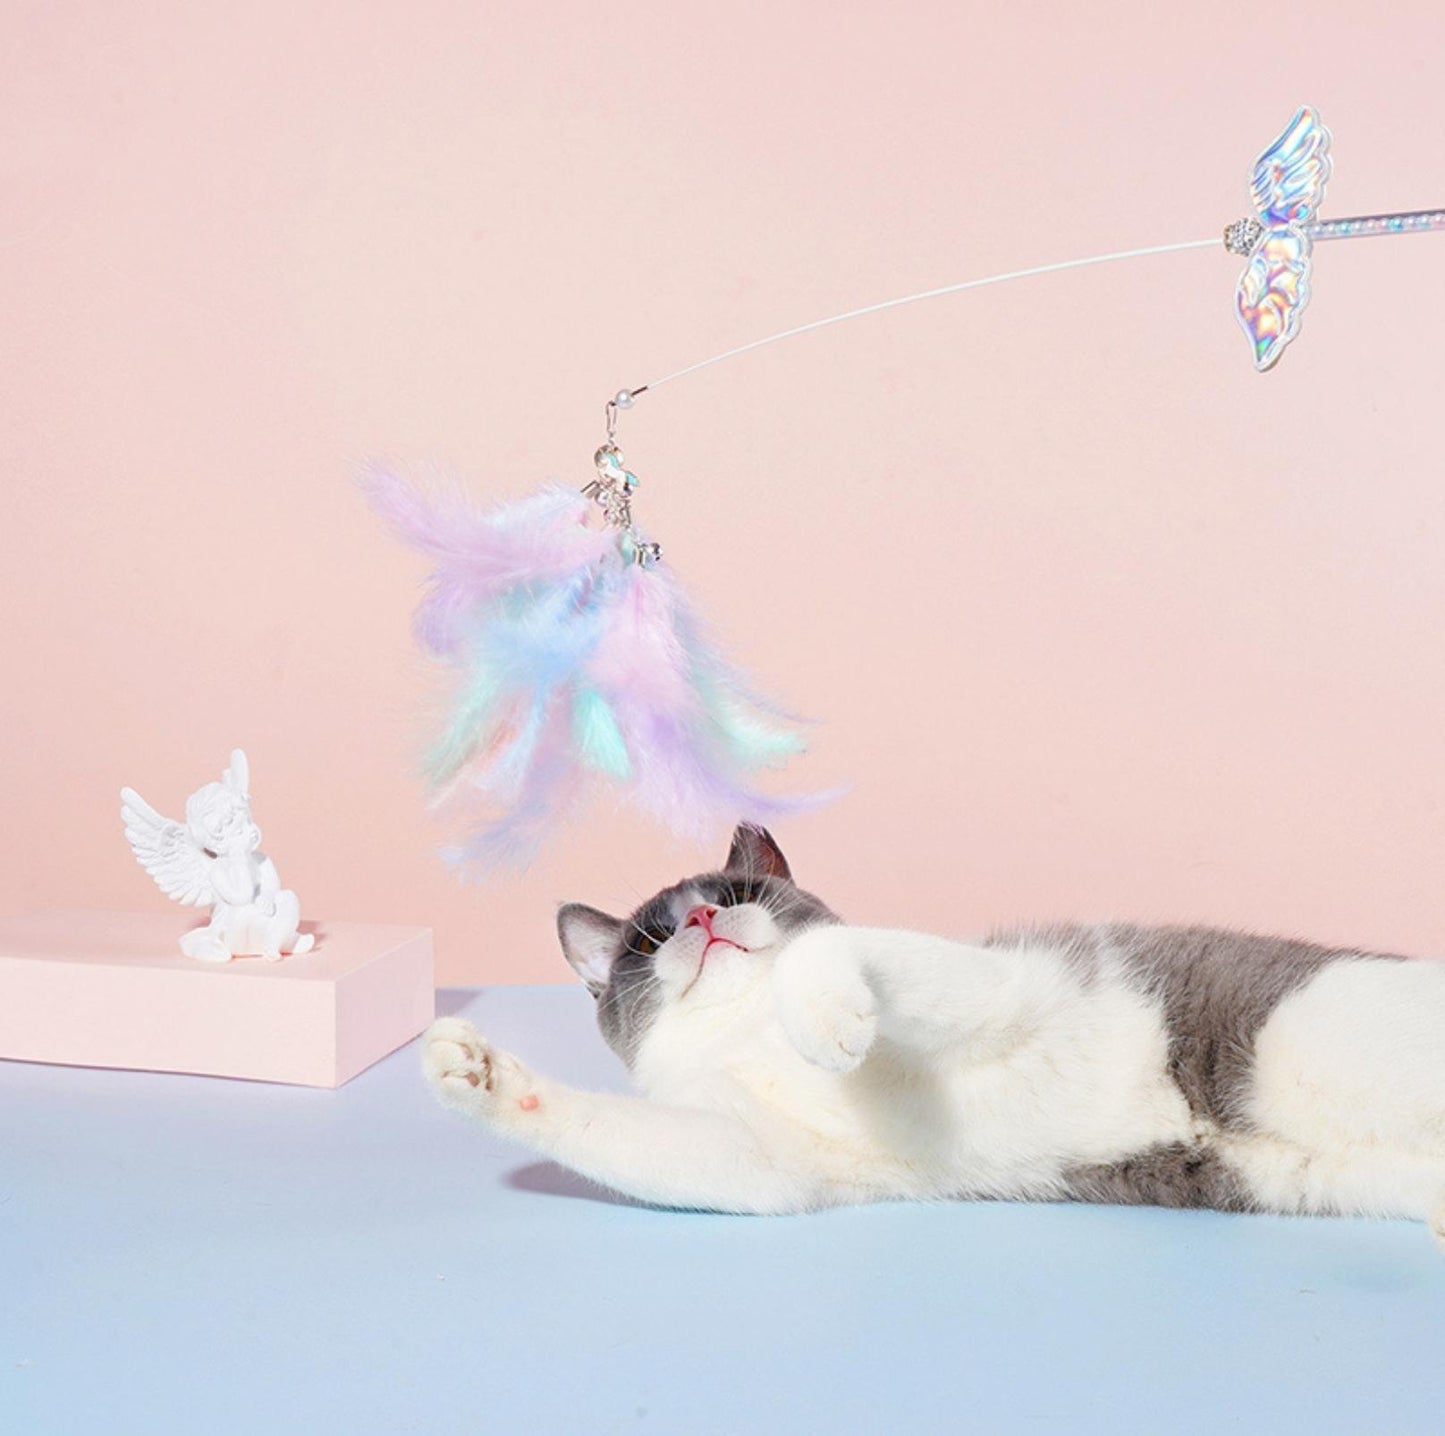 ZeZe Fairy Feather Cat Stick Toys - {{product.type}} - PawPawUp